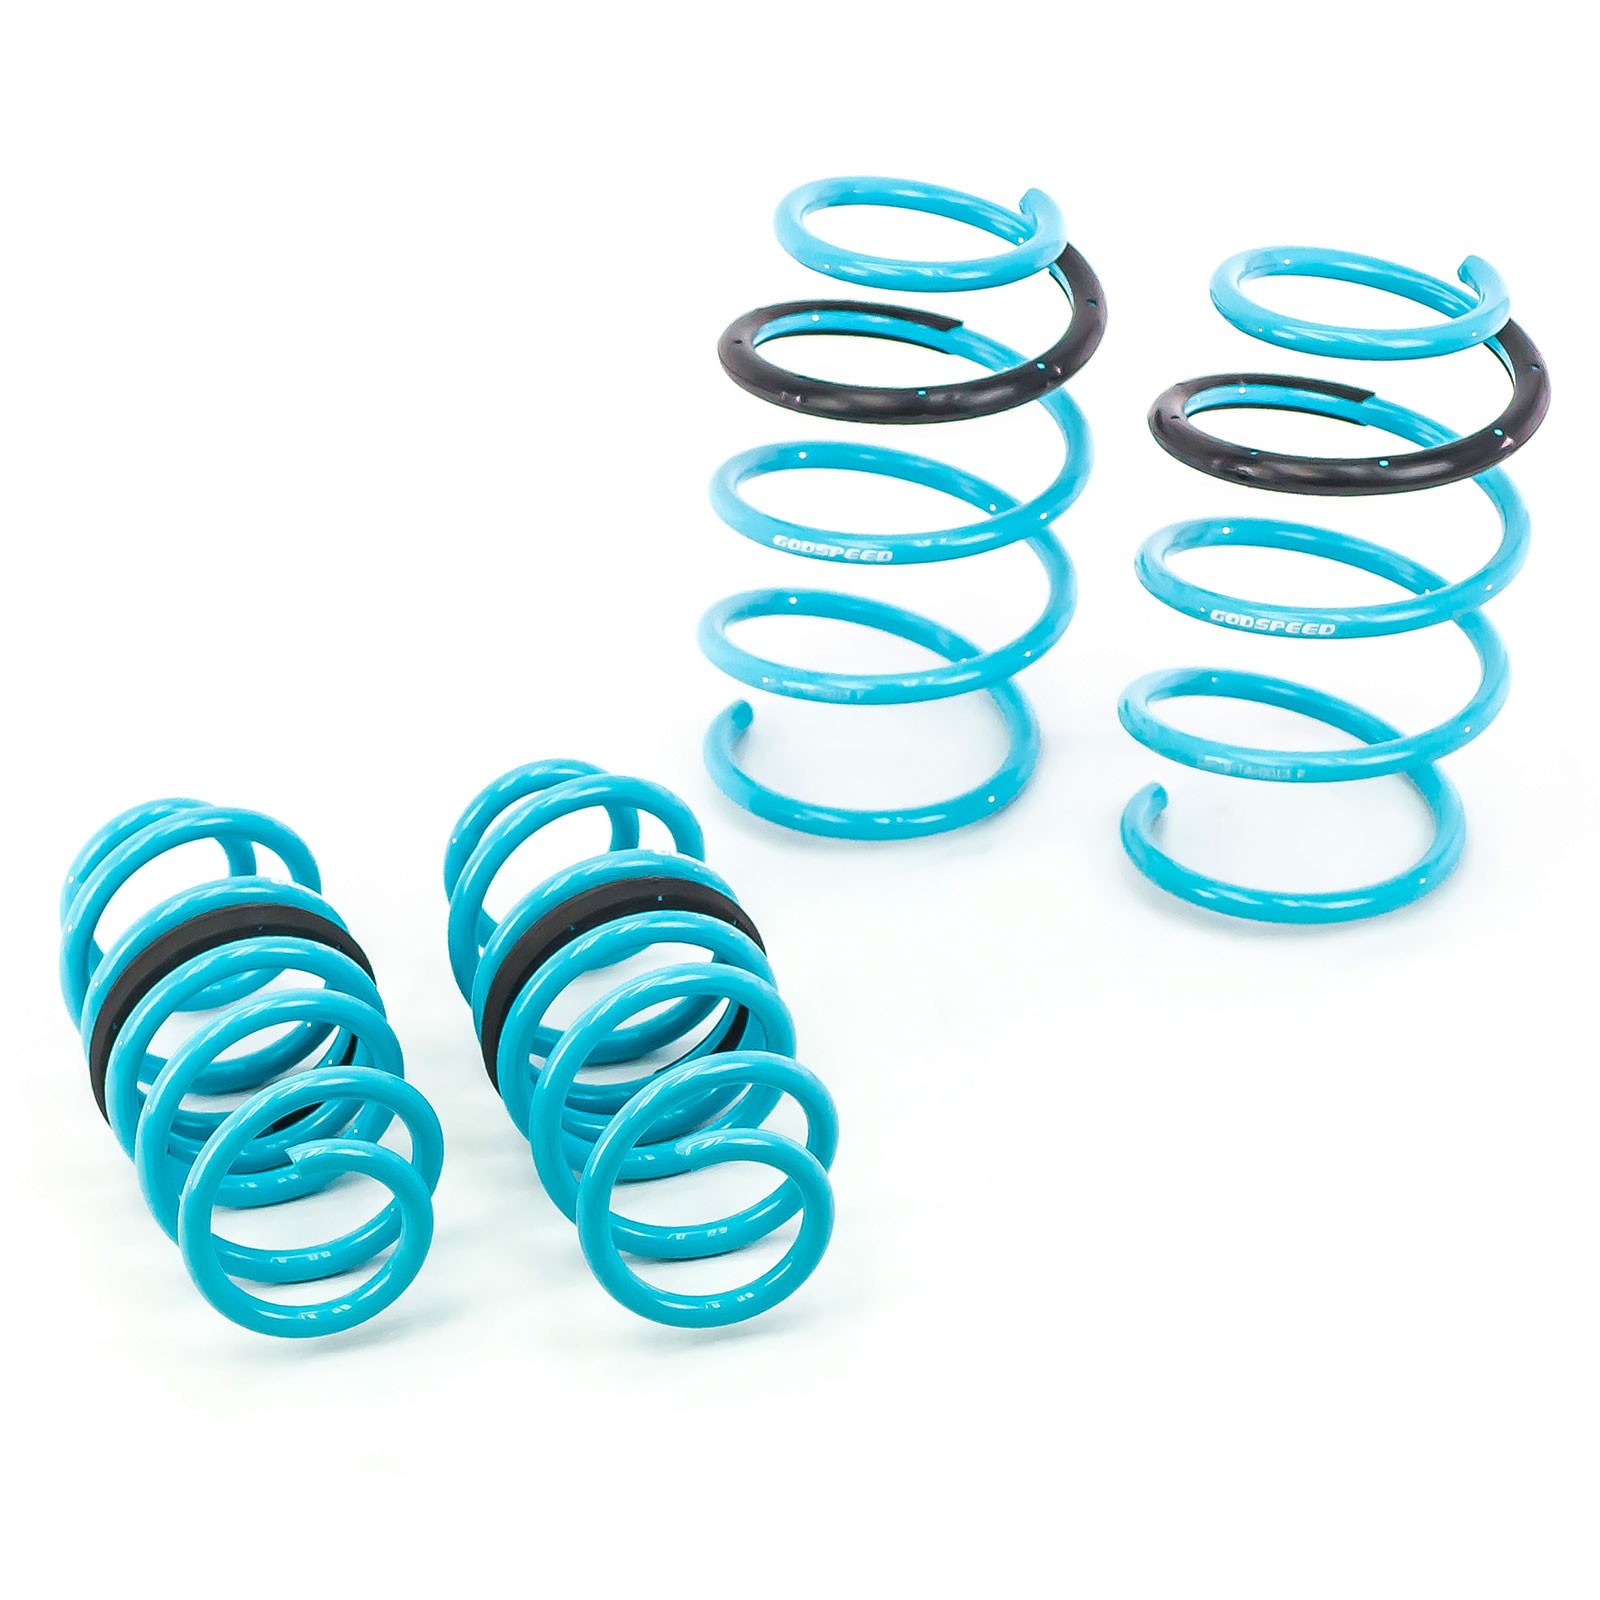 GSP Godspeed Traction S Springs Lowering Kit for Kia Optima 11-15 TF New